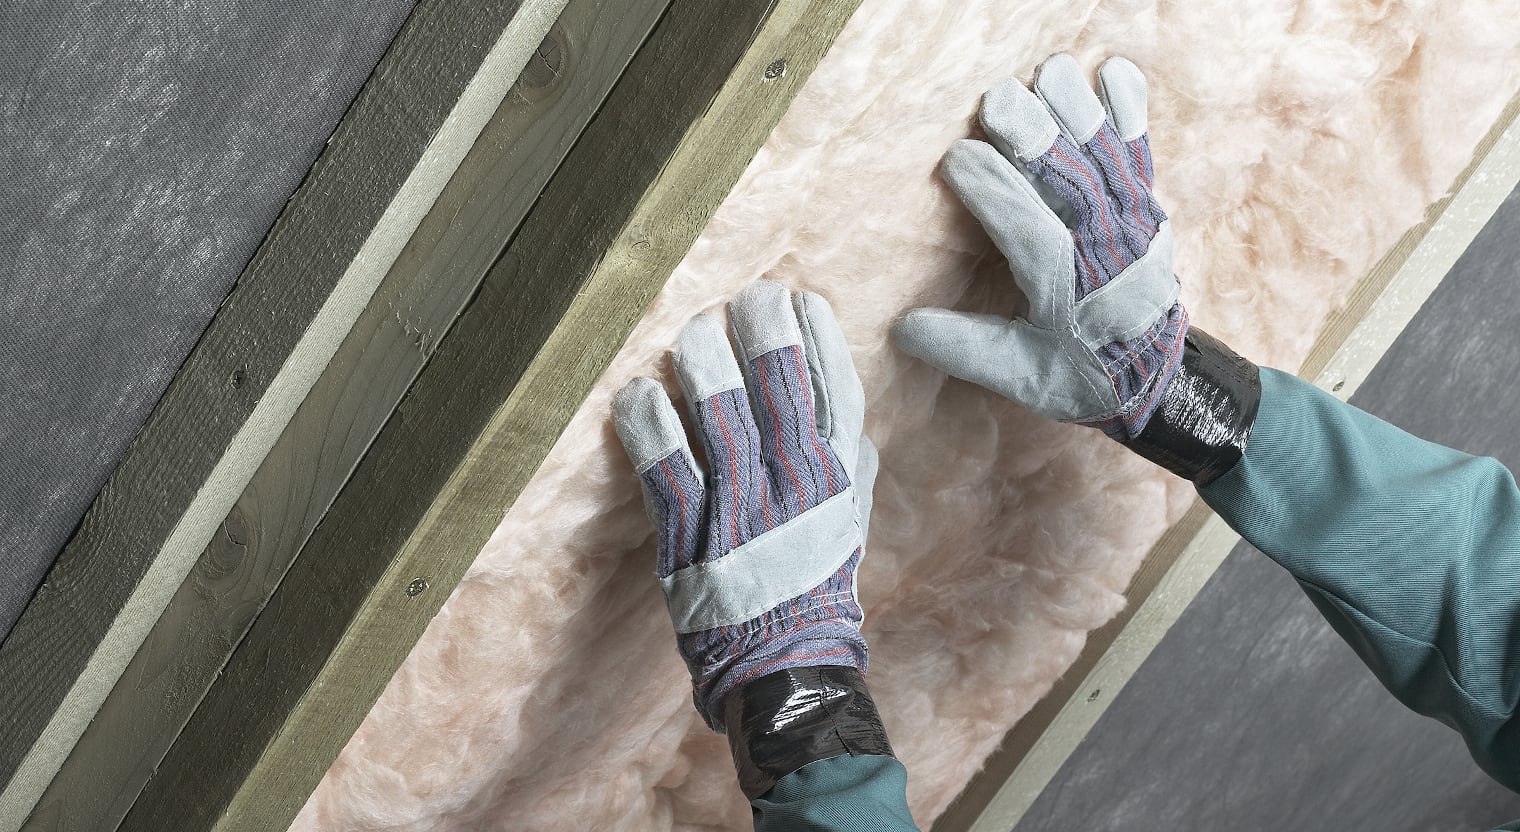 A construction worker wearing gloves is fitting insulation material.